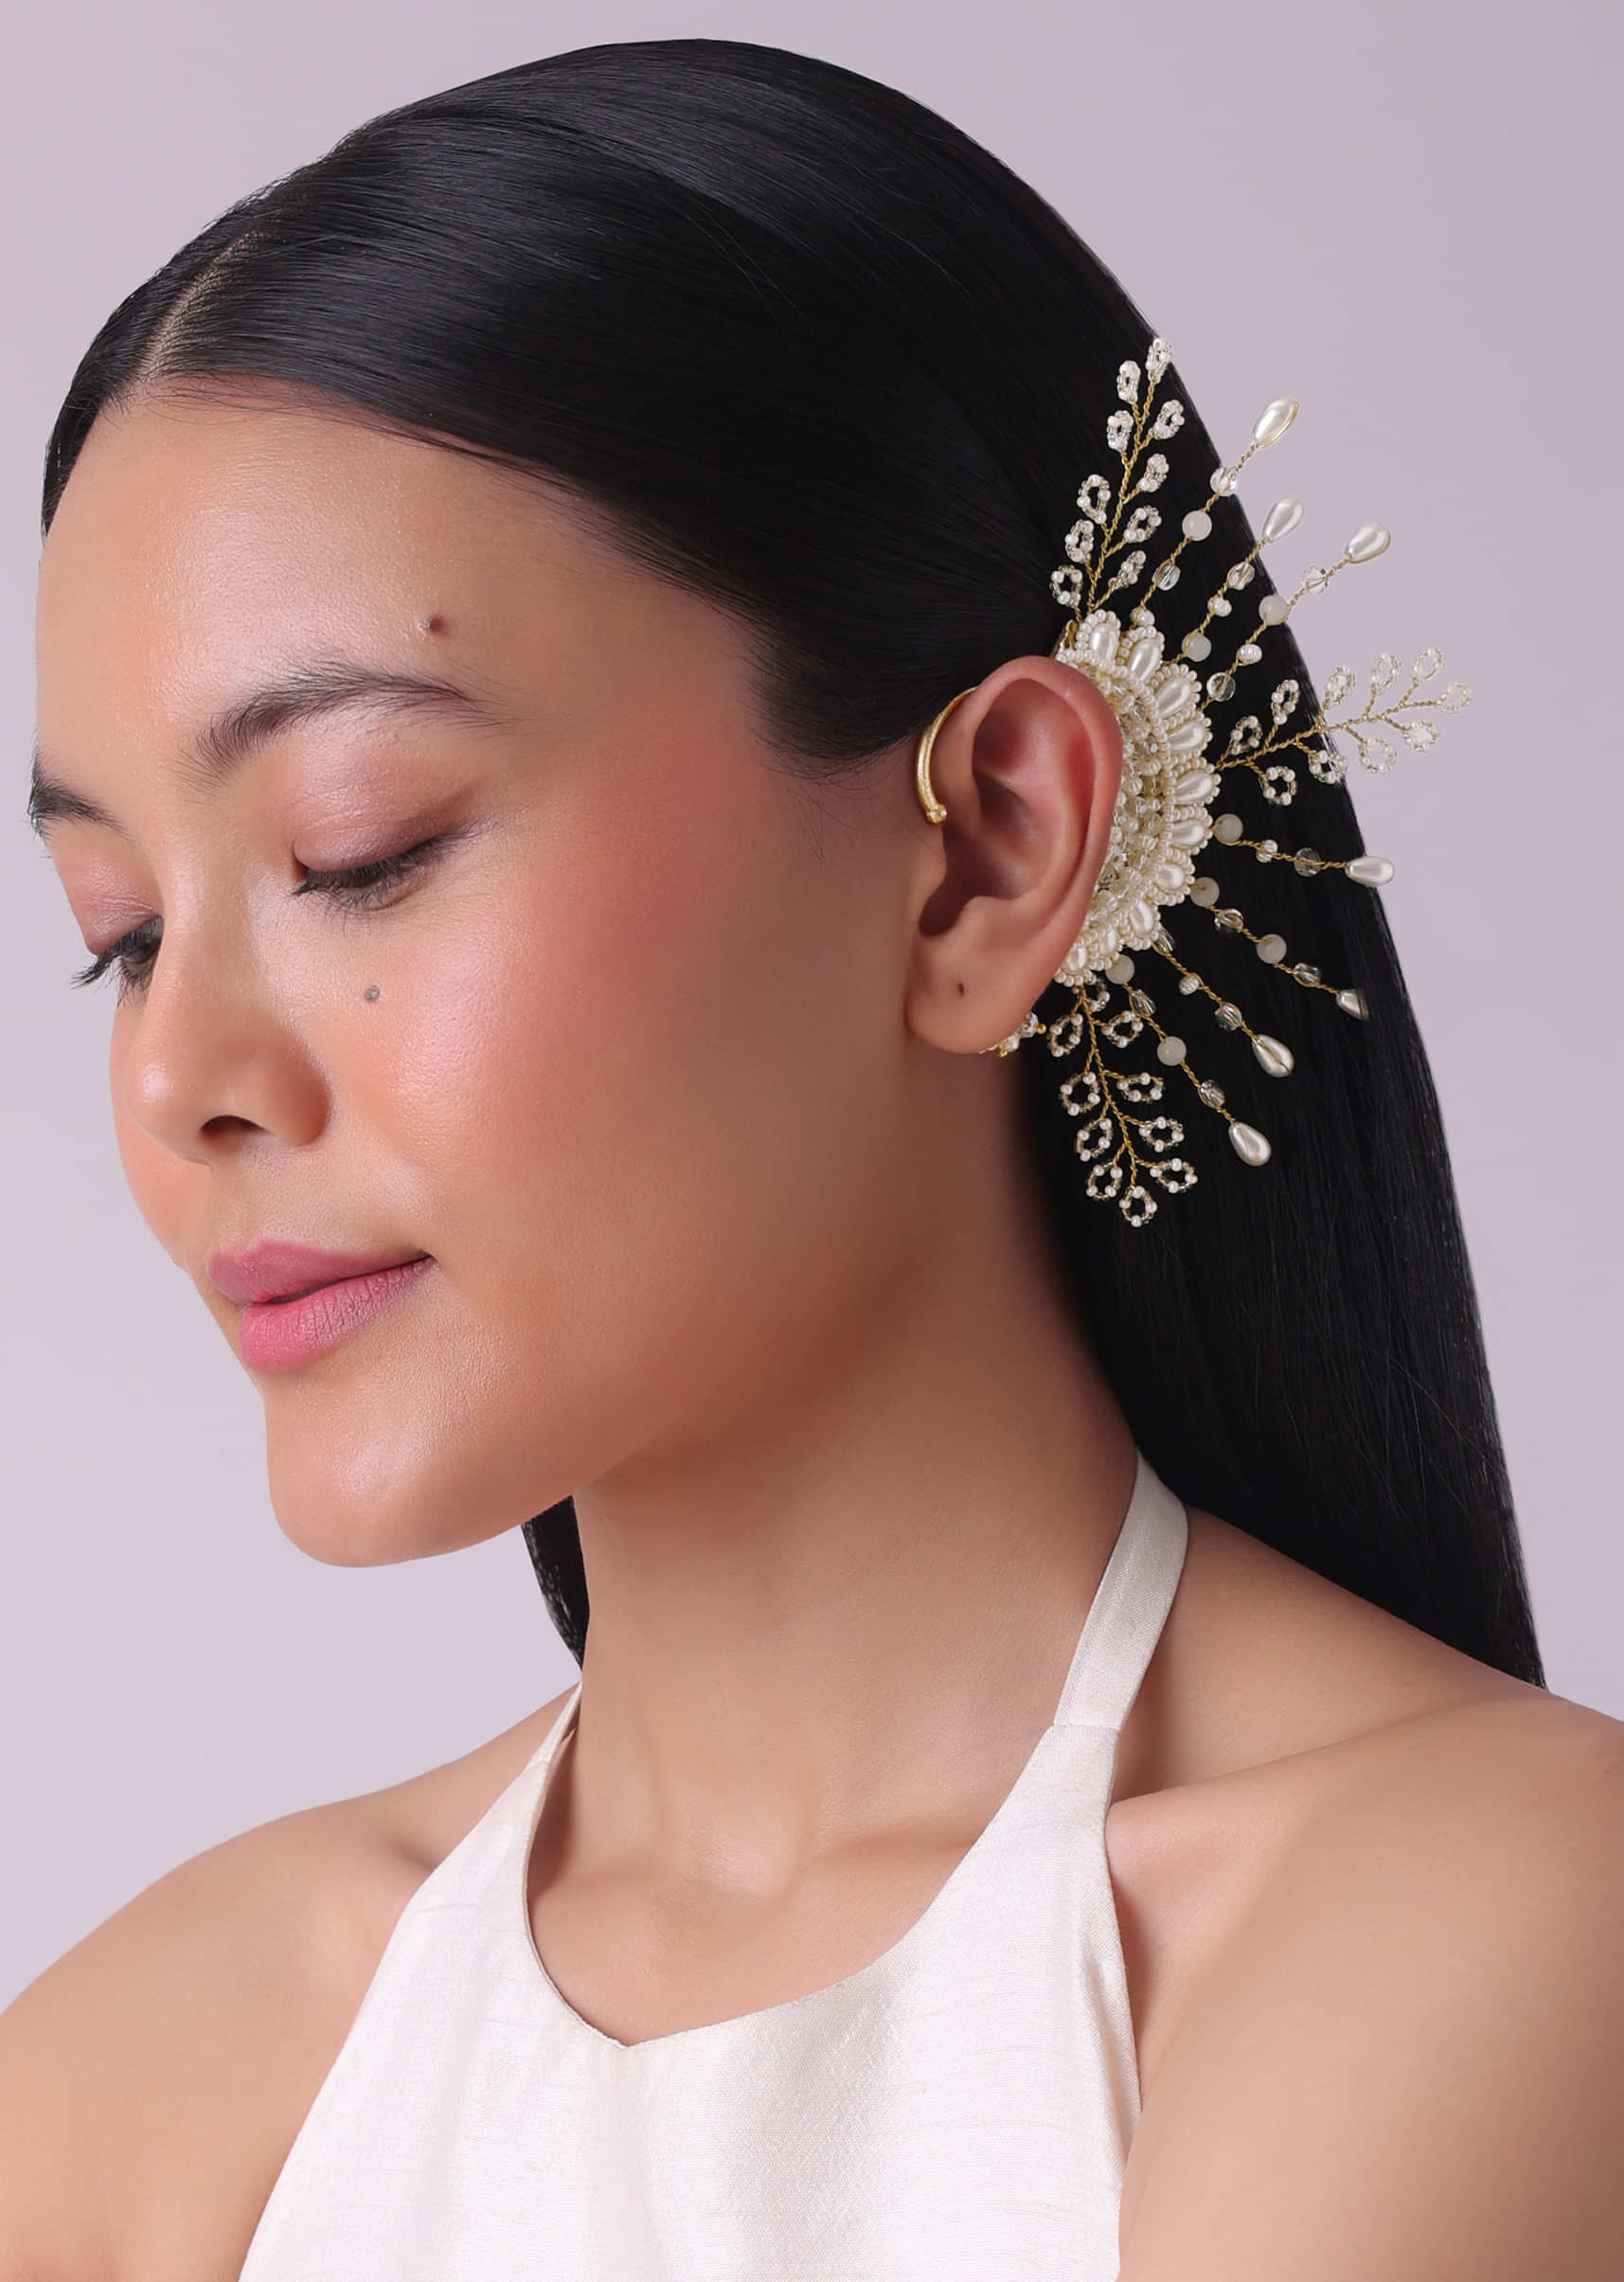 Gold Finish White Pearl Embellished Ear Cuff